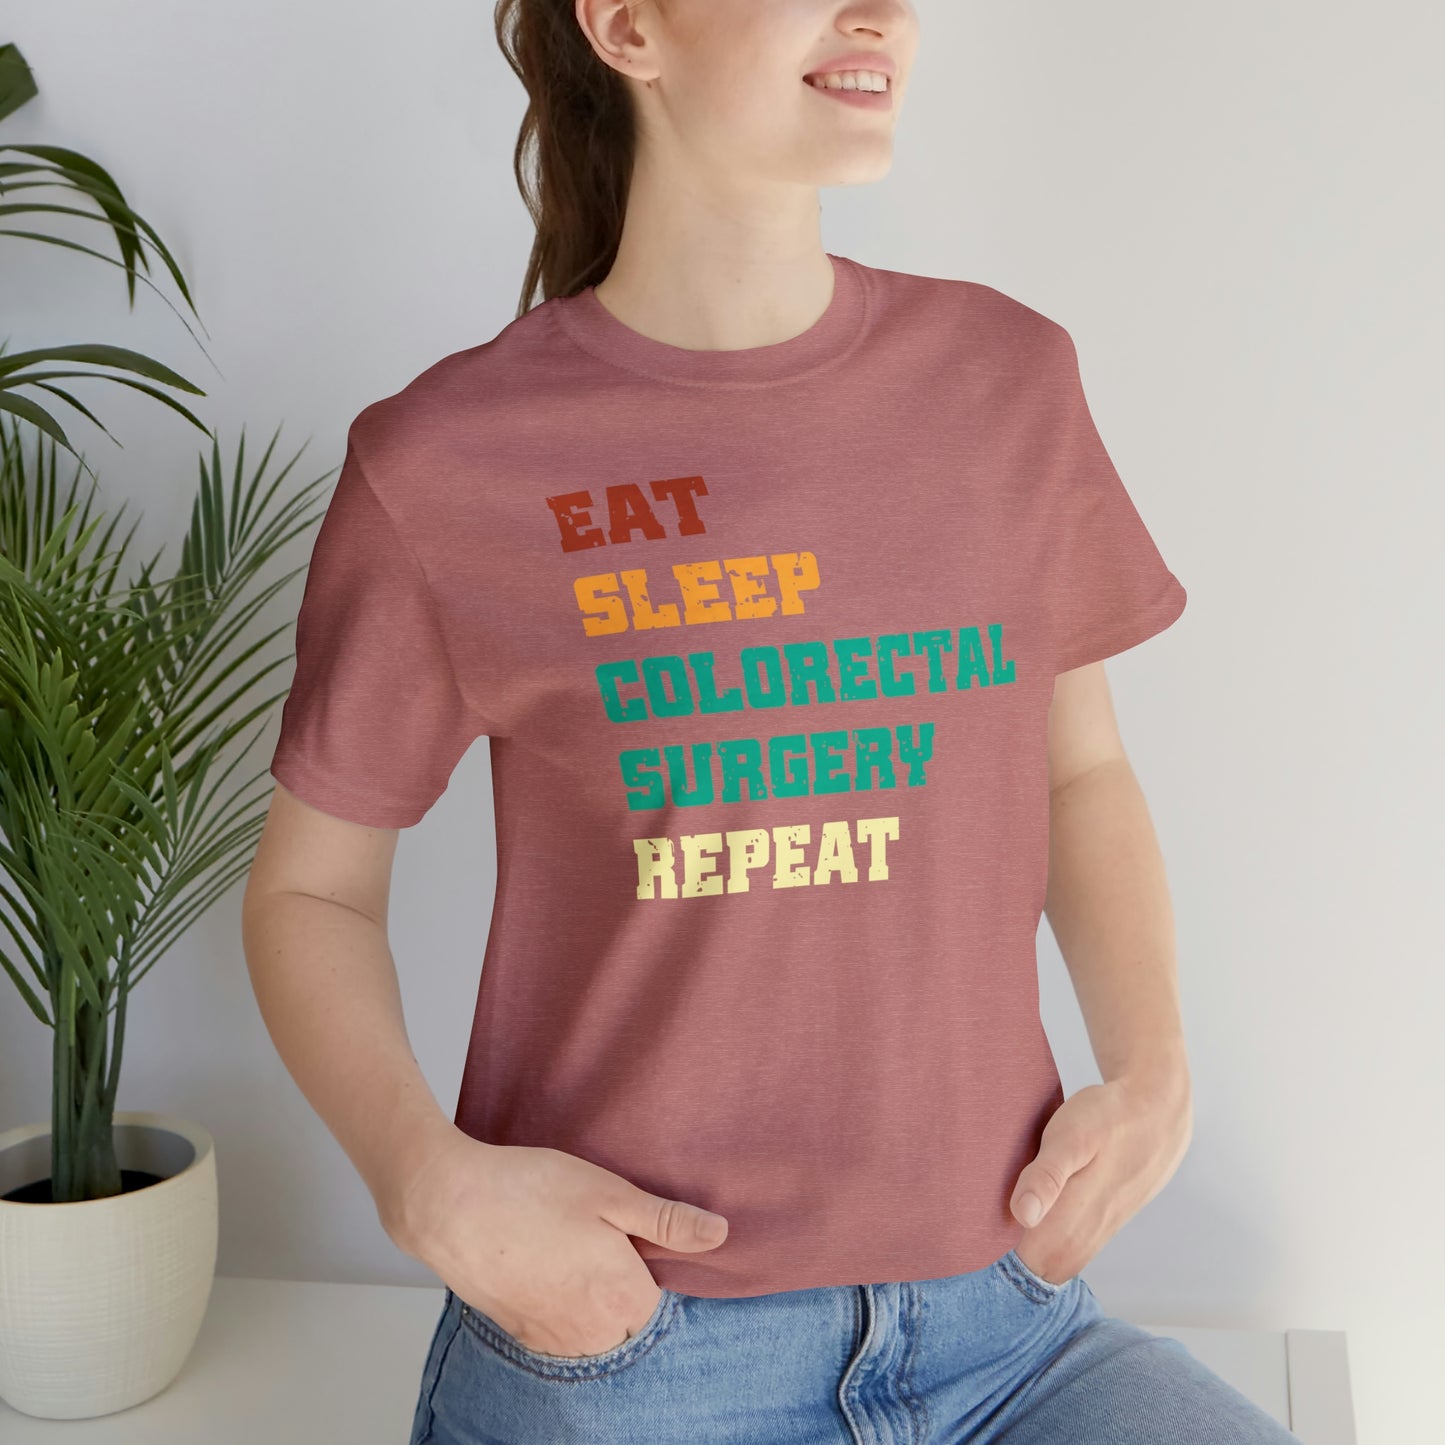 Eat Sleep Colorectal Surgery Repeat, Unisex T-shirt, Mothers Day, Fathers Day, Doctor, Surgeon, Surgical Team Gift